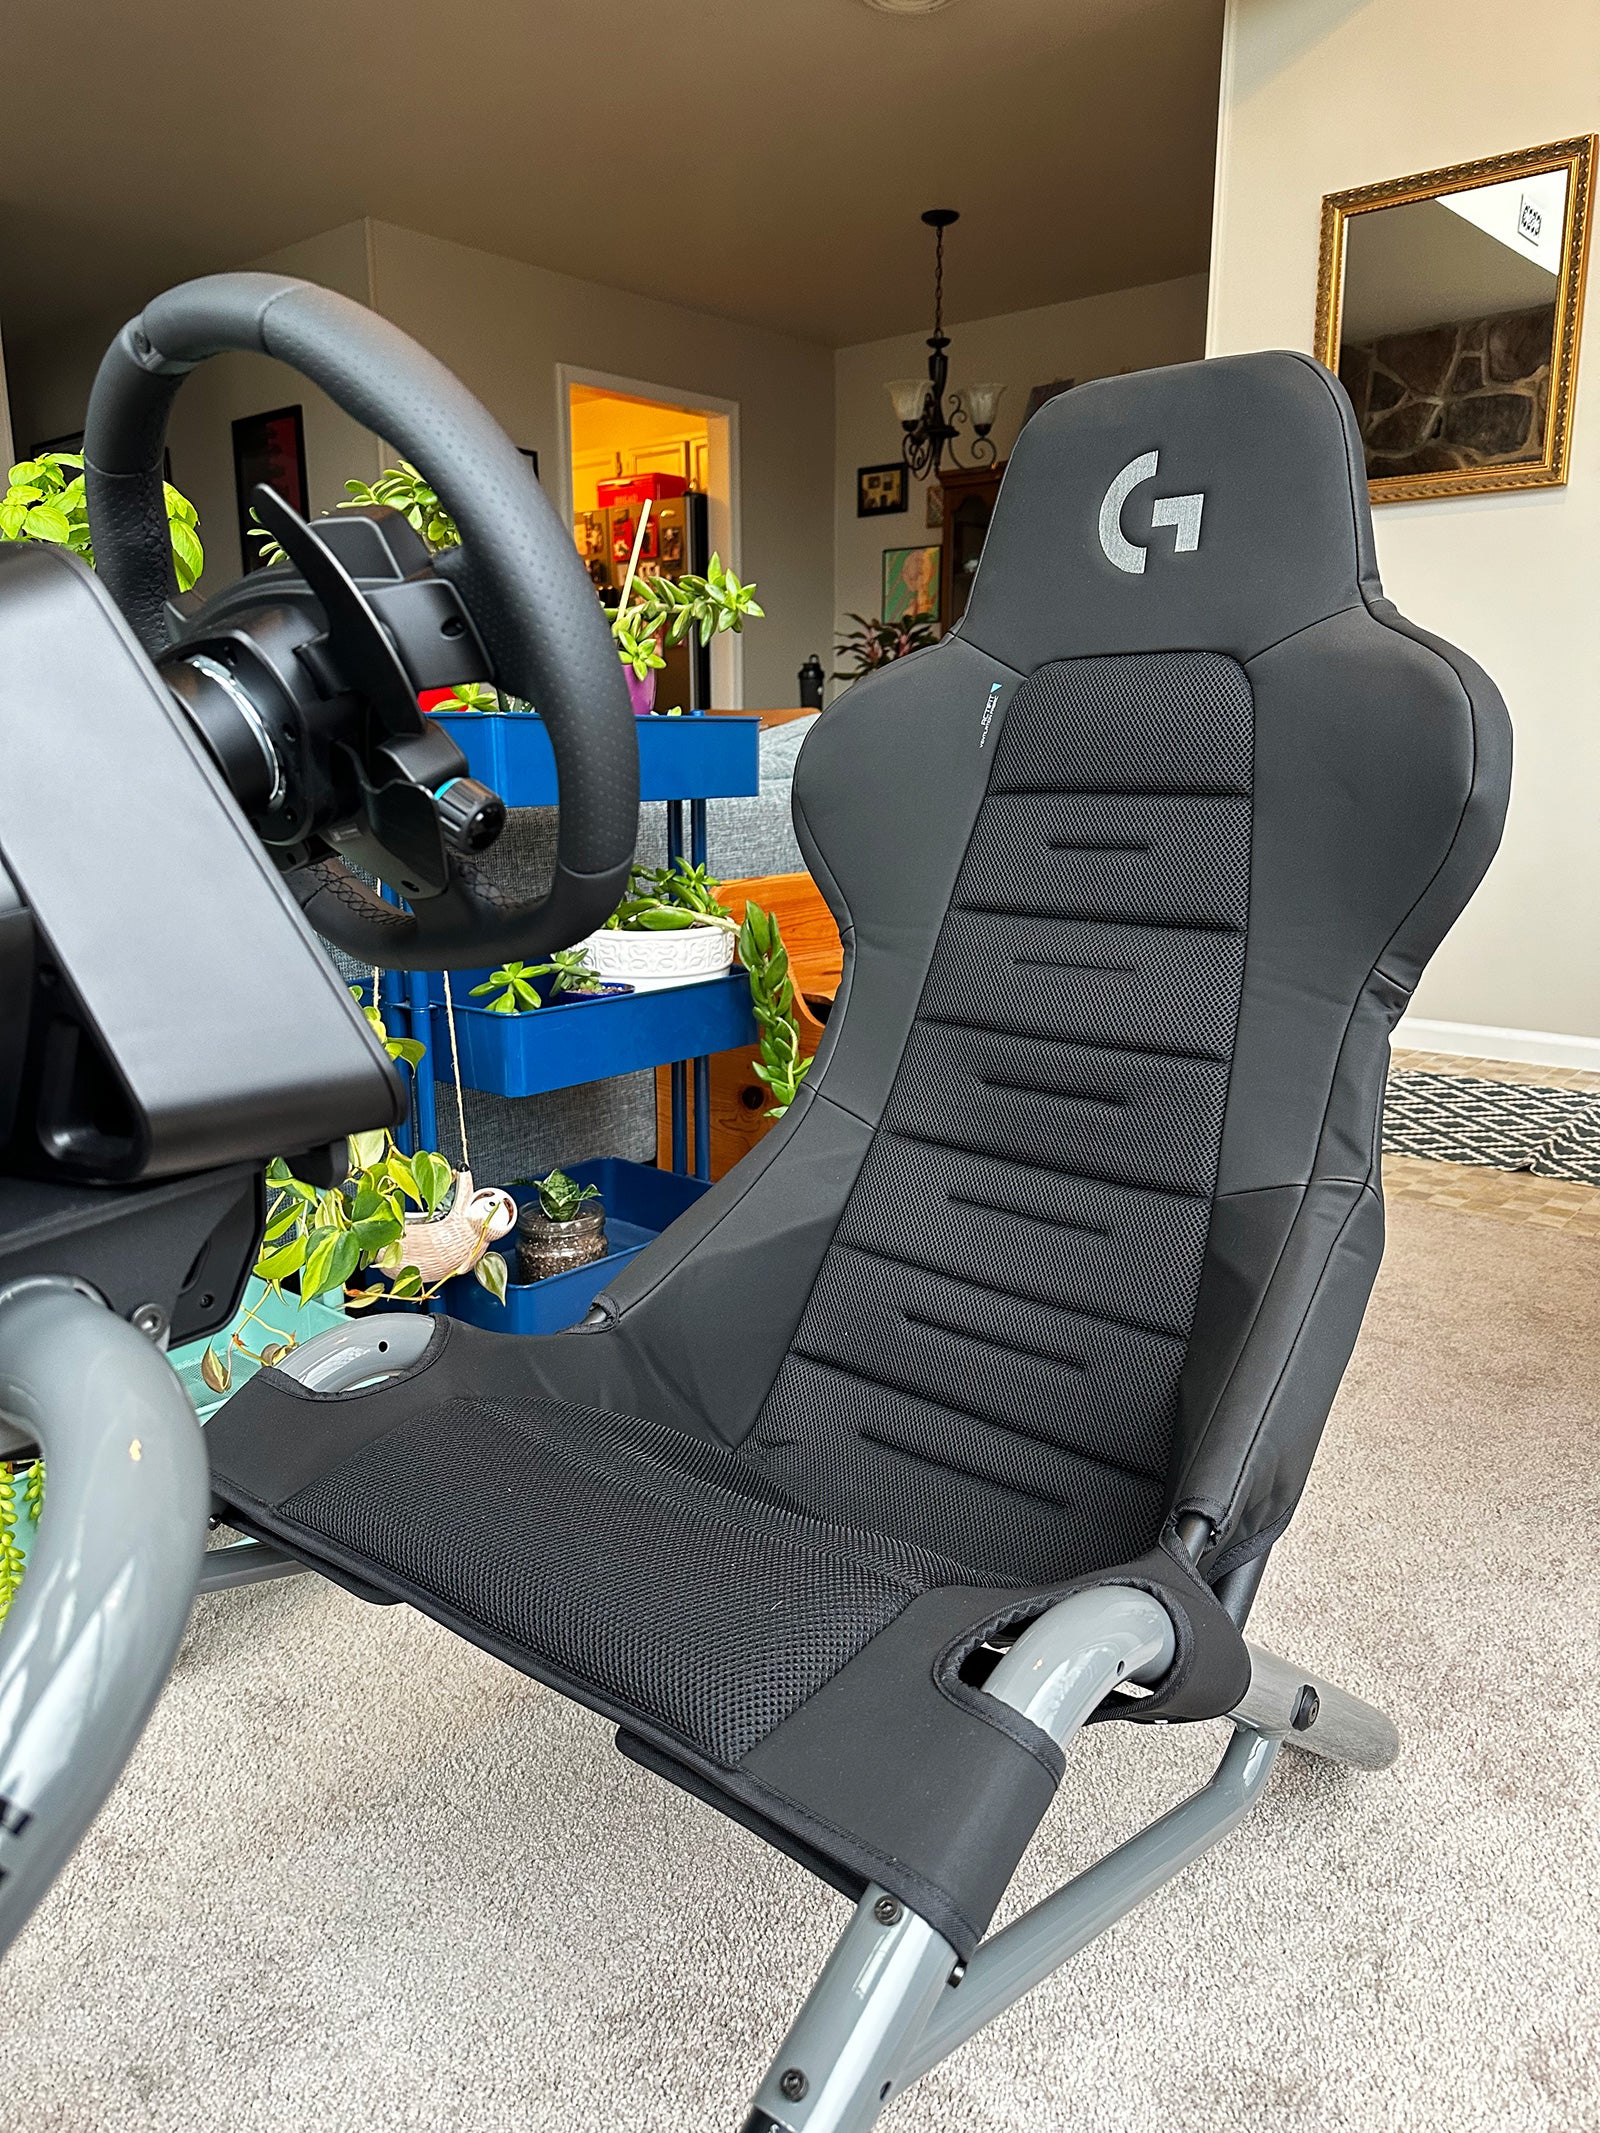 The Playseat Trophy Is the Sensible, Surprisingly Lightweight Cockpit Every Sim Racer Deserves